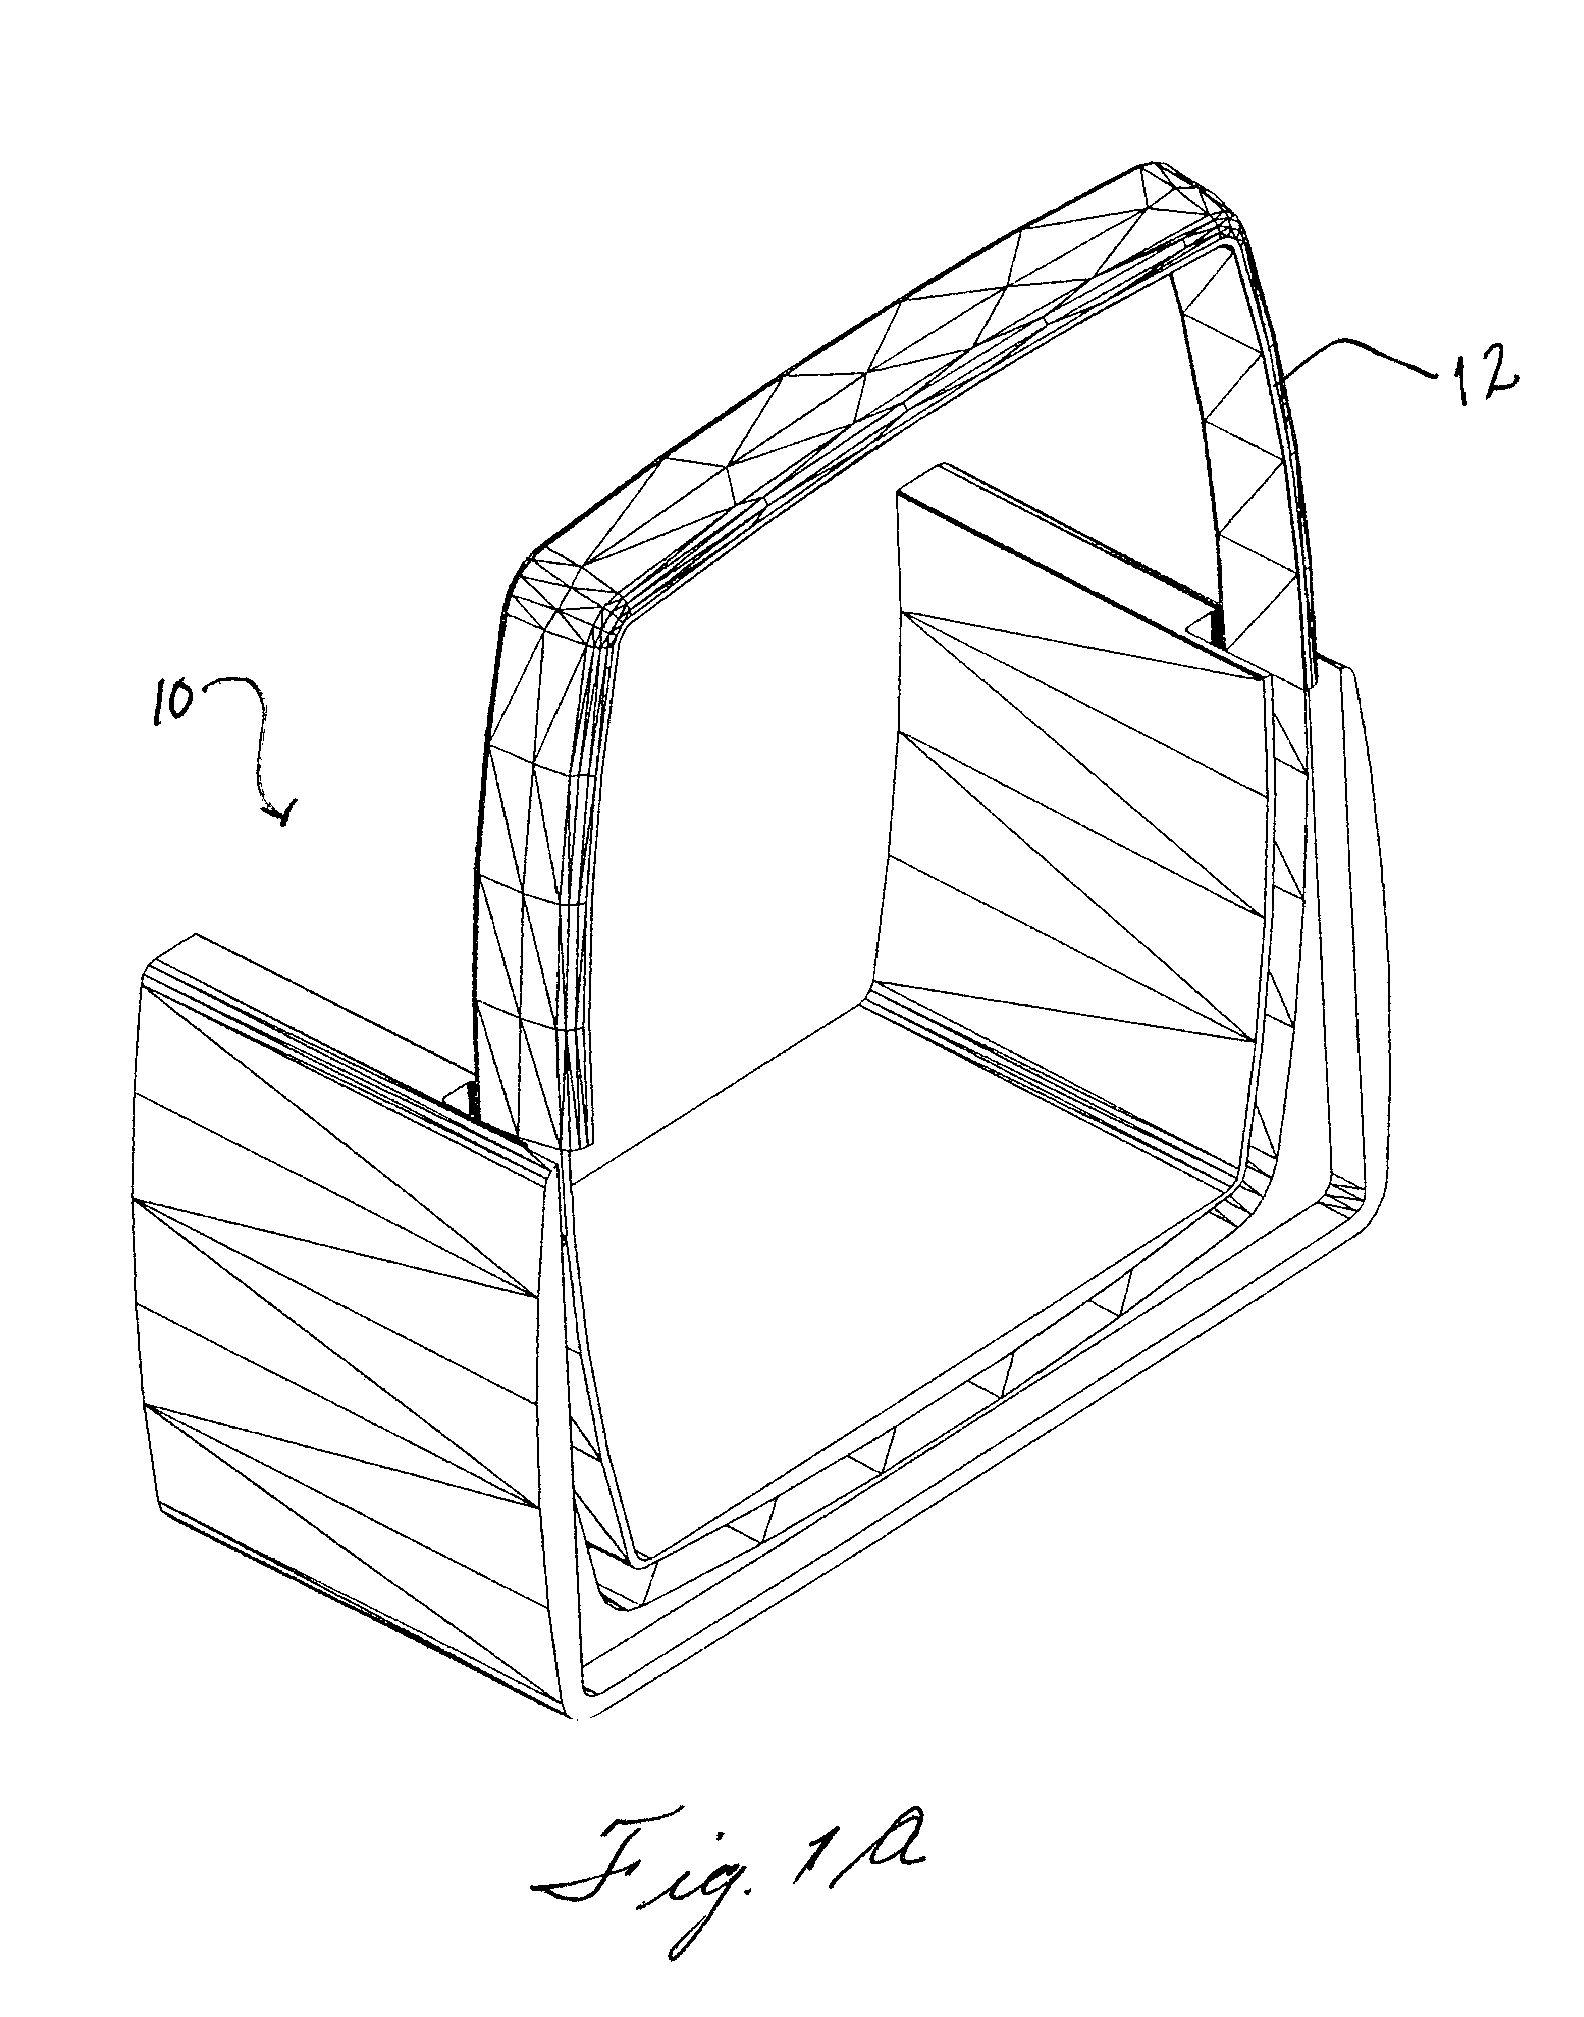 Truck bed extension and roll bar apparatus